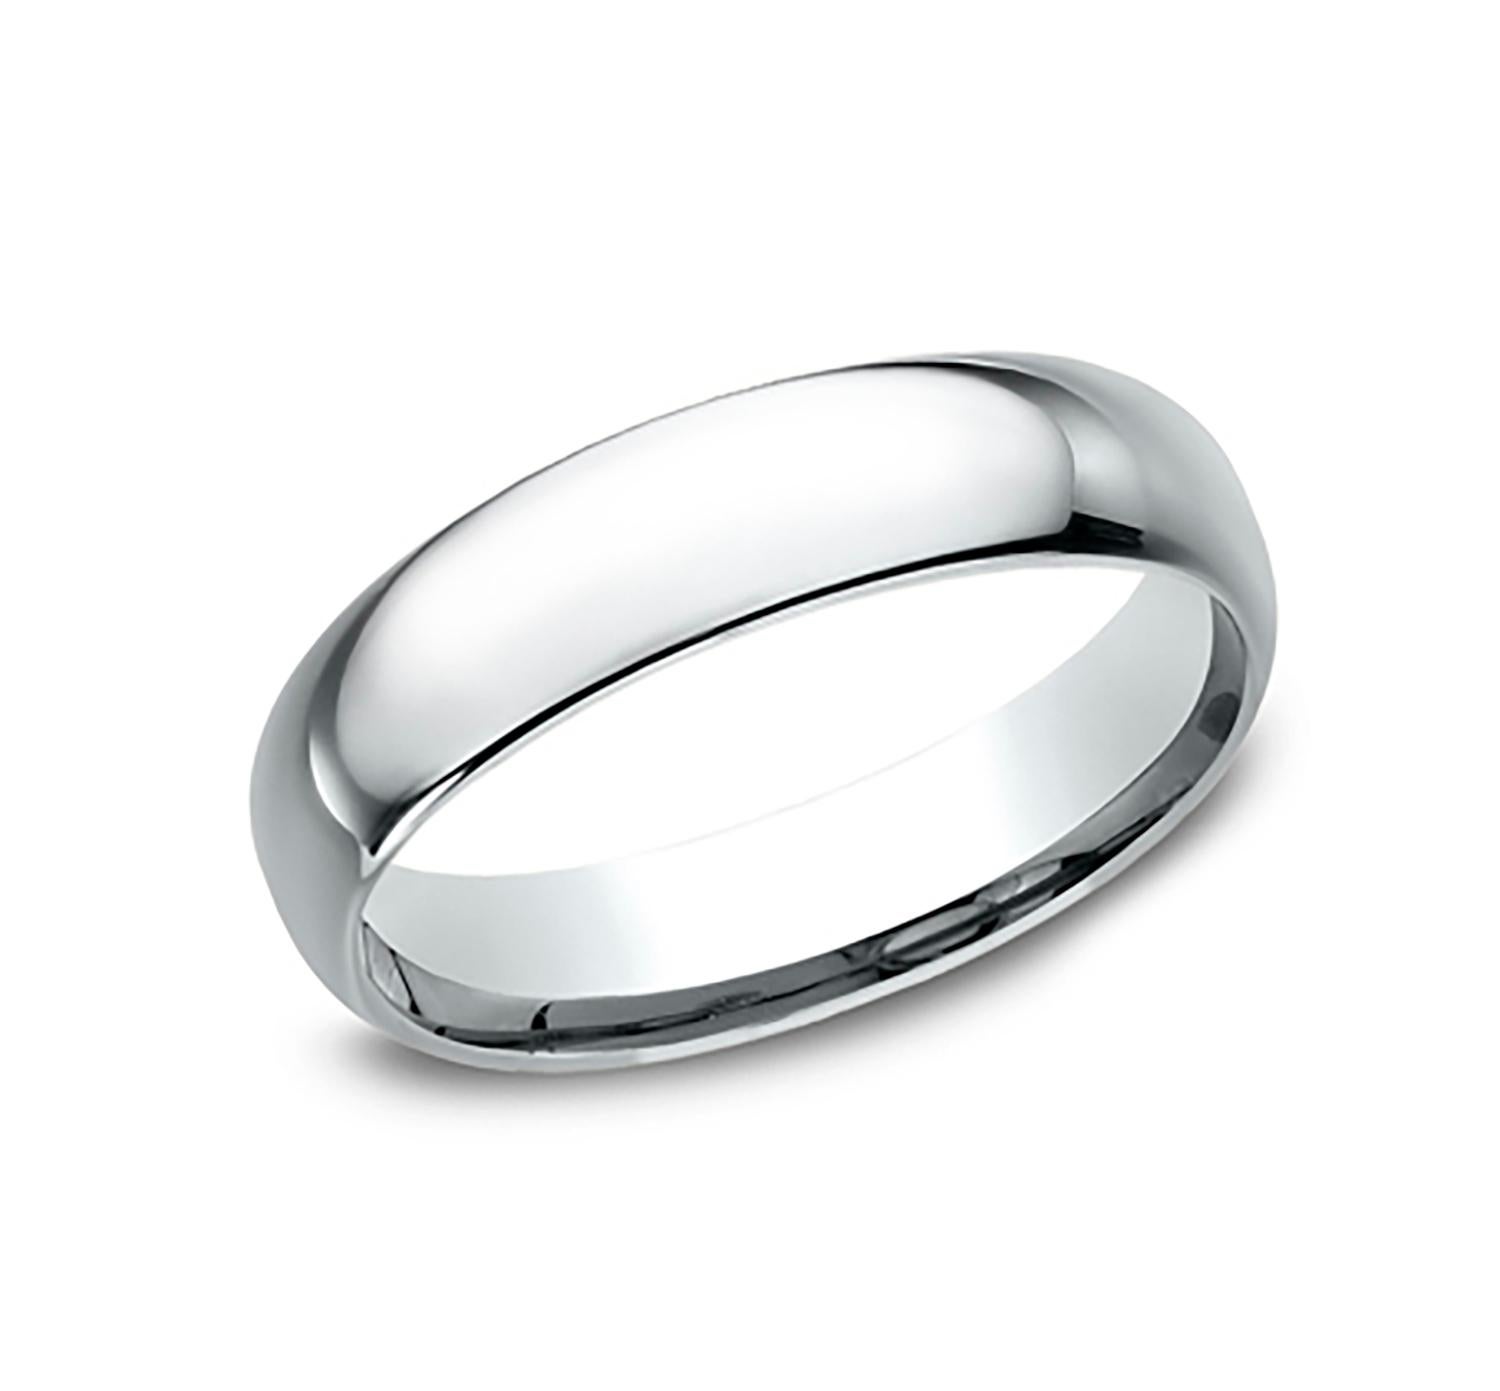 Benchmark wedding band in polished platinum finish. Width 5mm, high dome comfort fit. Custom engraving and finishing available. Size 10 US and resizable upon request. Available in 1/4, 1/2, and 3/4 sizes, for more information please message us on